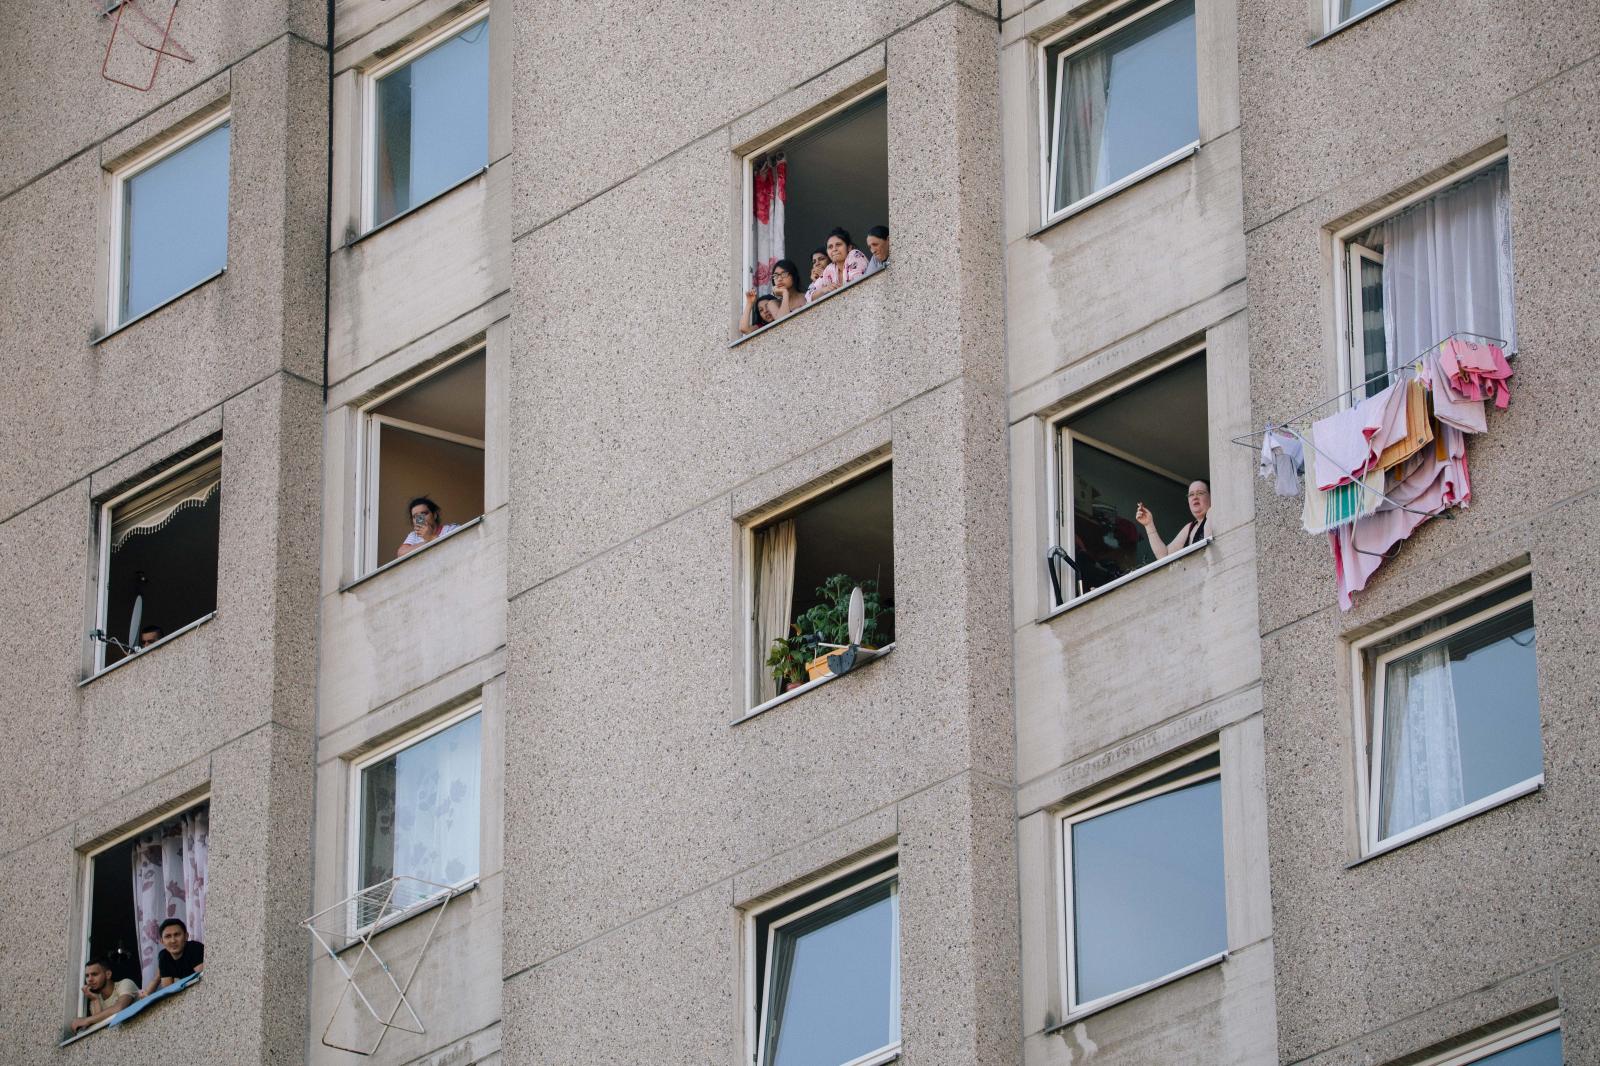 Tower Block Quarantine / "We are also humans" - Residents watch solidary protesters gathering at their...